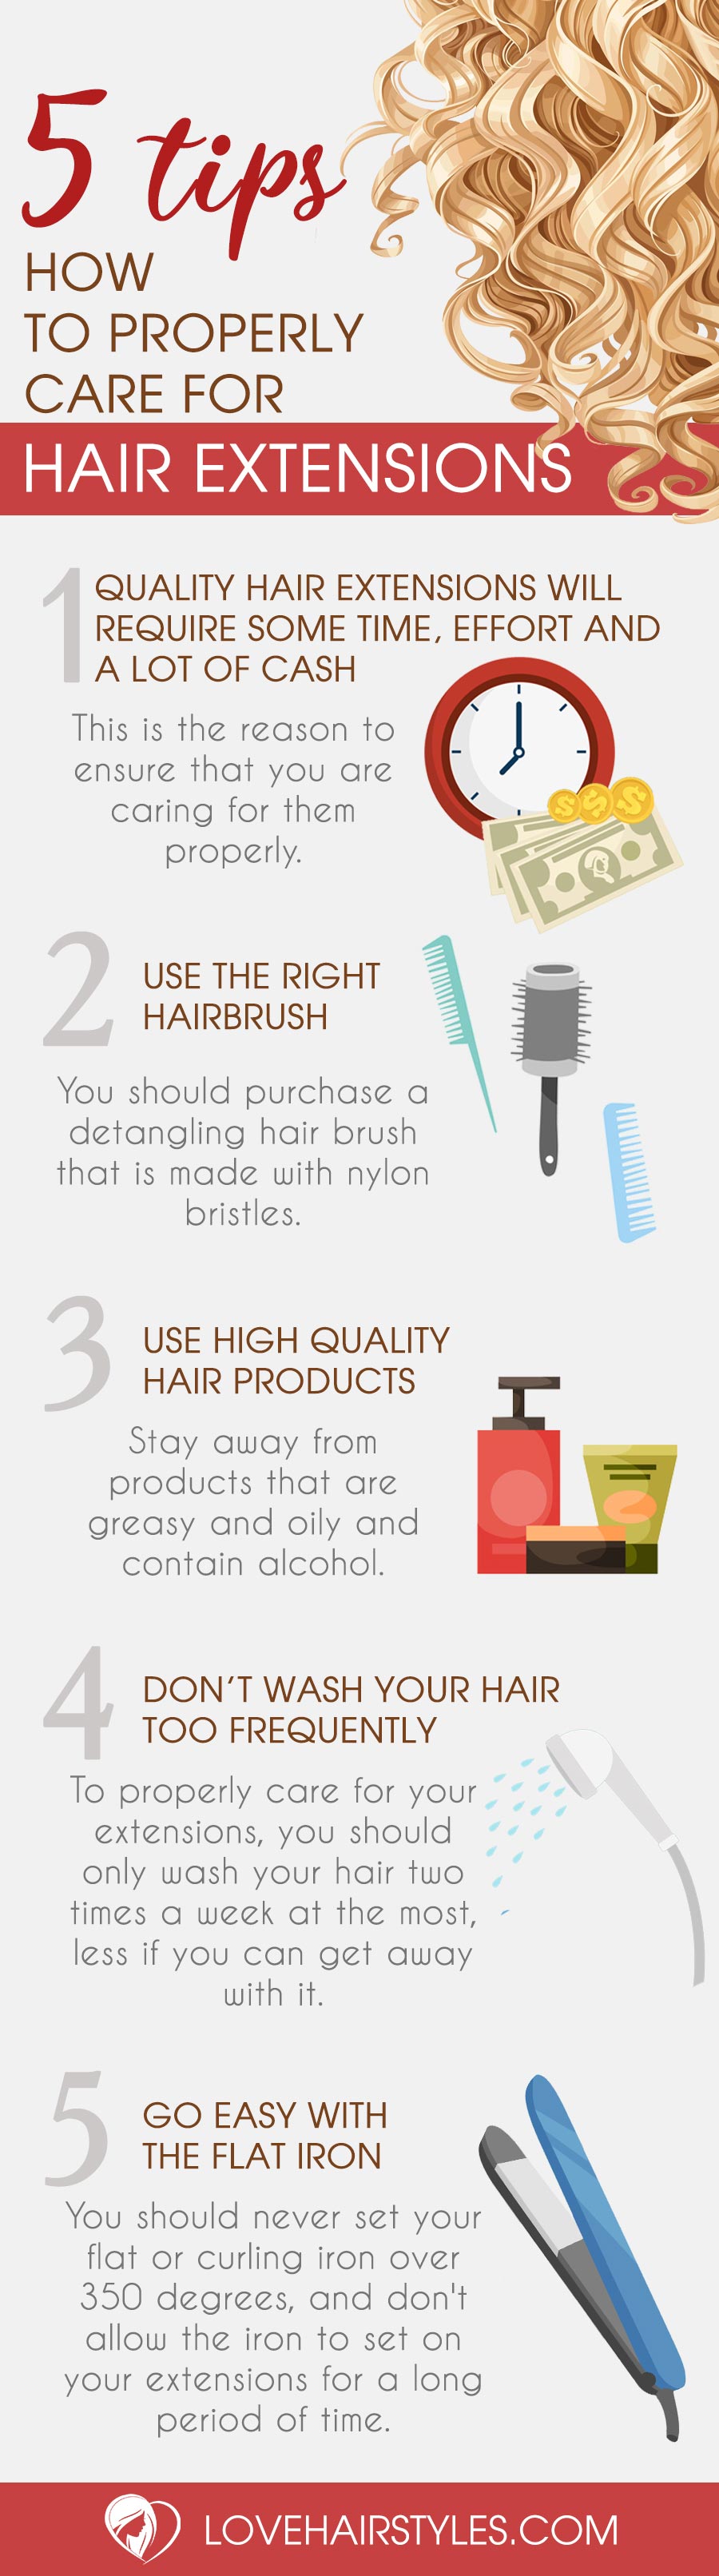 Helpful Tips on How to Properly Care for Hair Extensions